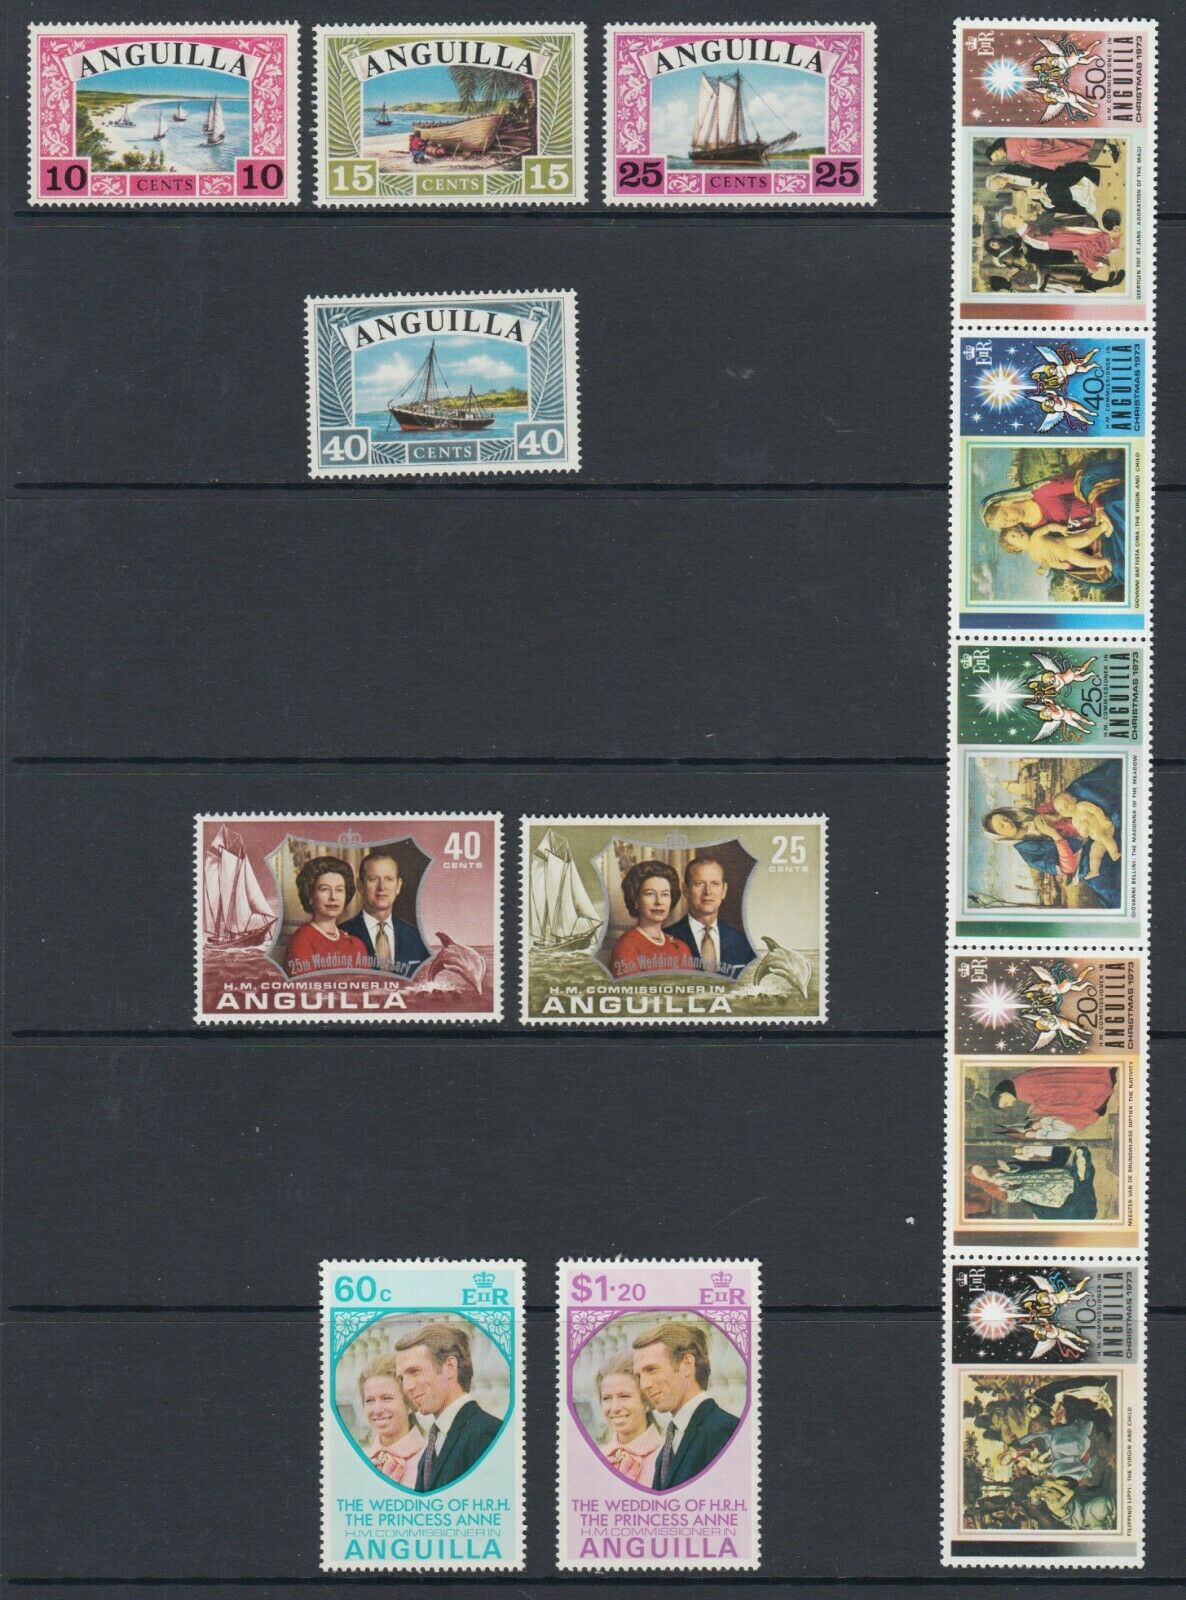 Anguilla Sc 32-35, 161-162, 179-180,186b Mnh. 1968-1973 Issues, 4 Cplt Sets, Vf.